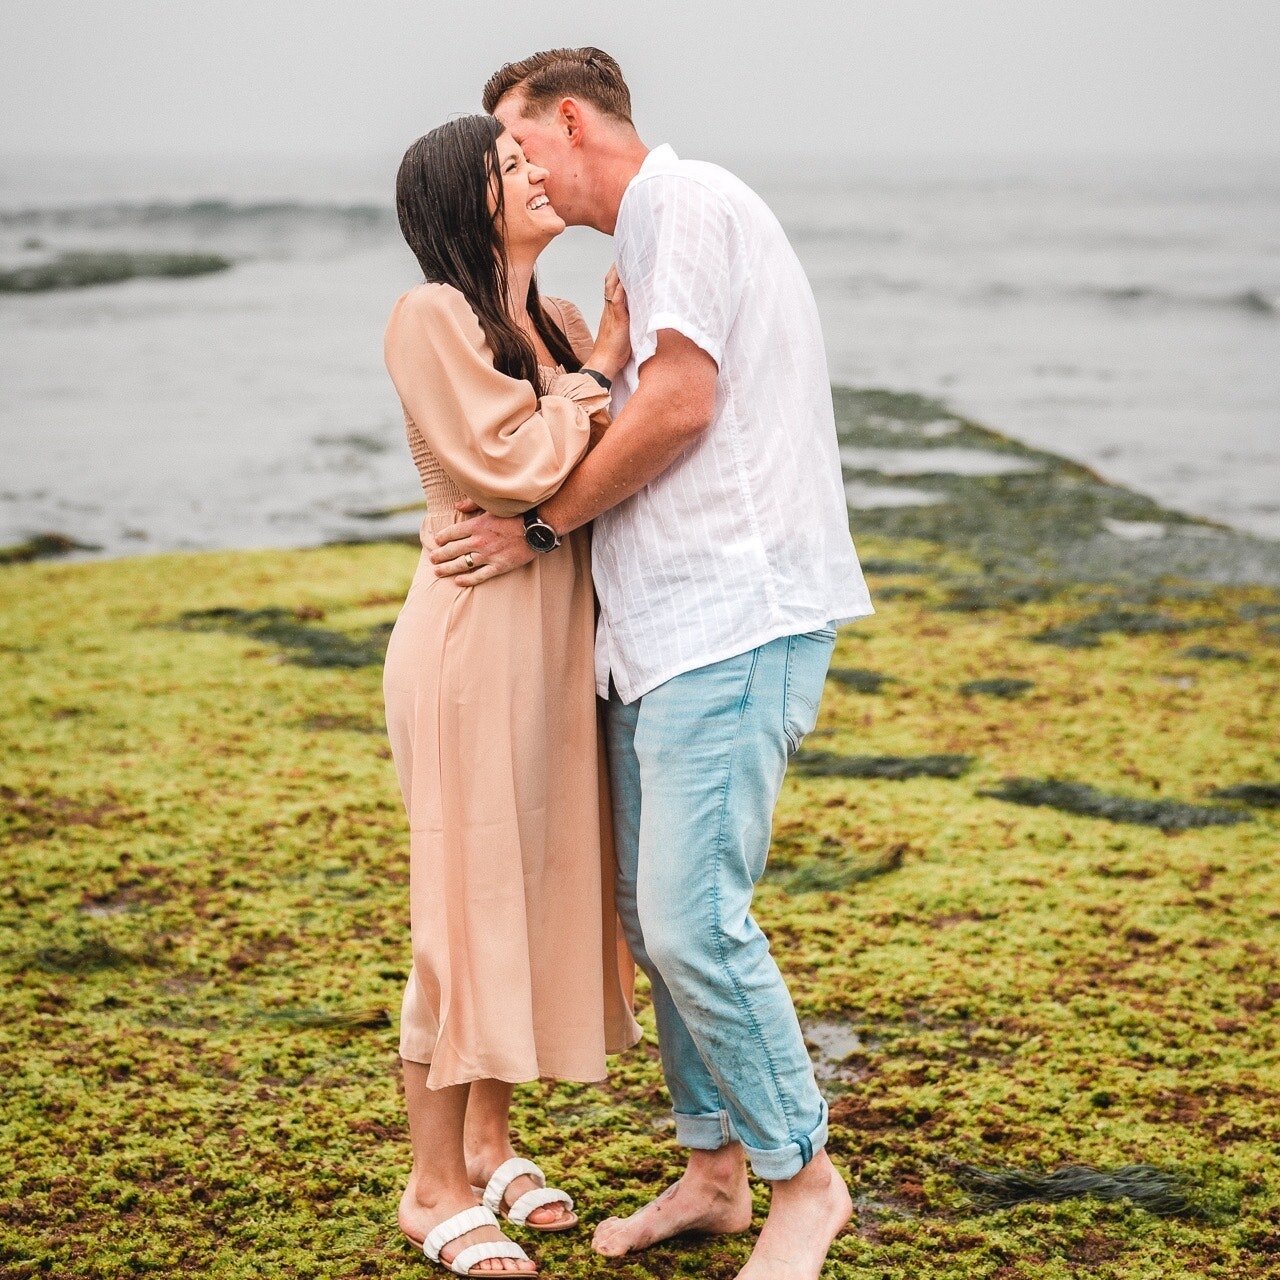 Rainy day magic at La Jolla Tidepools for Miranda + Jake's engagement. 
Shooting in the rain can present unique challenges, but it also offers the opportunity to capture some truly magical and distinctive images. 

Here are some tips for shooting in 